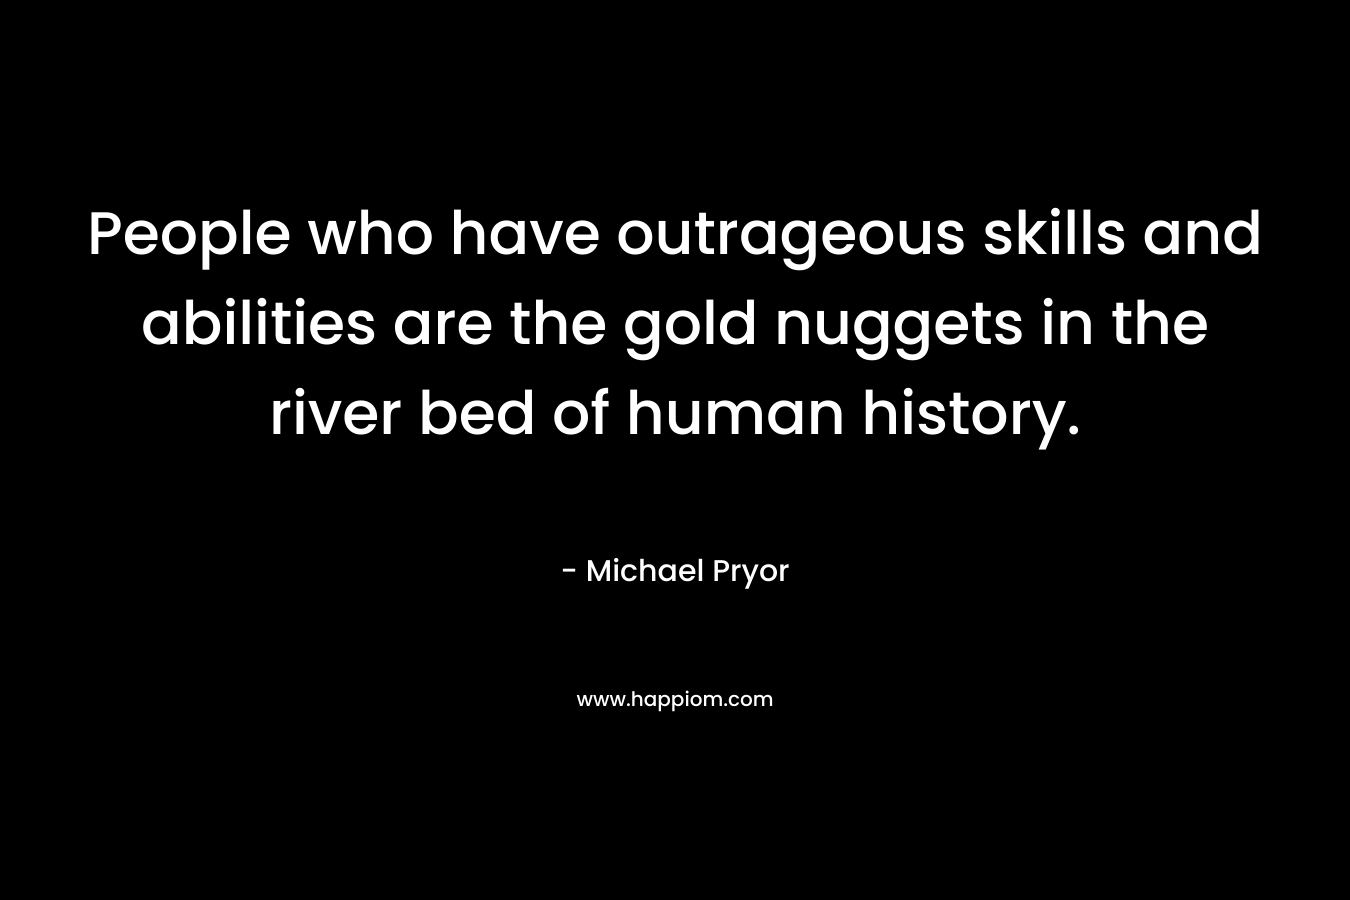 People who have outrageous skills and abilities are the gold nuggets in the river bed of human history. – Michael Pryor